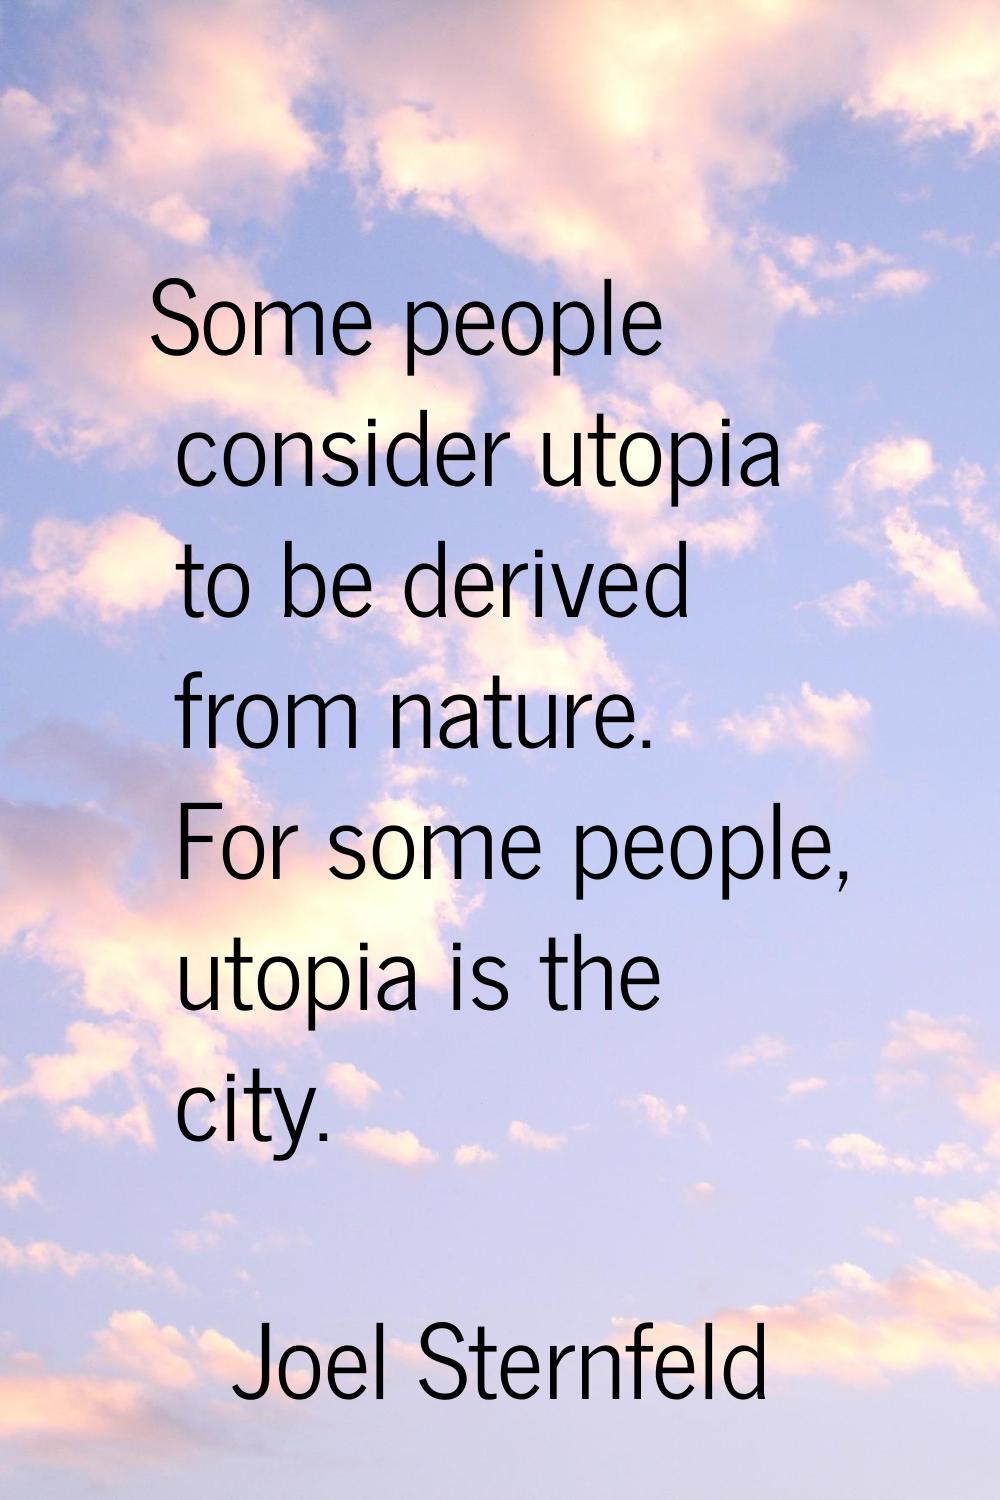 Some people consider utopia to be derived from nature. For some people, utopia is the city.